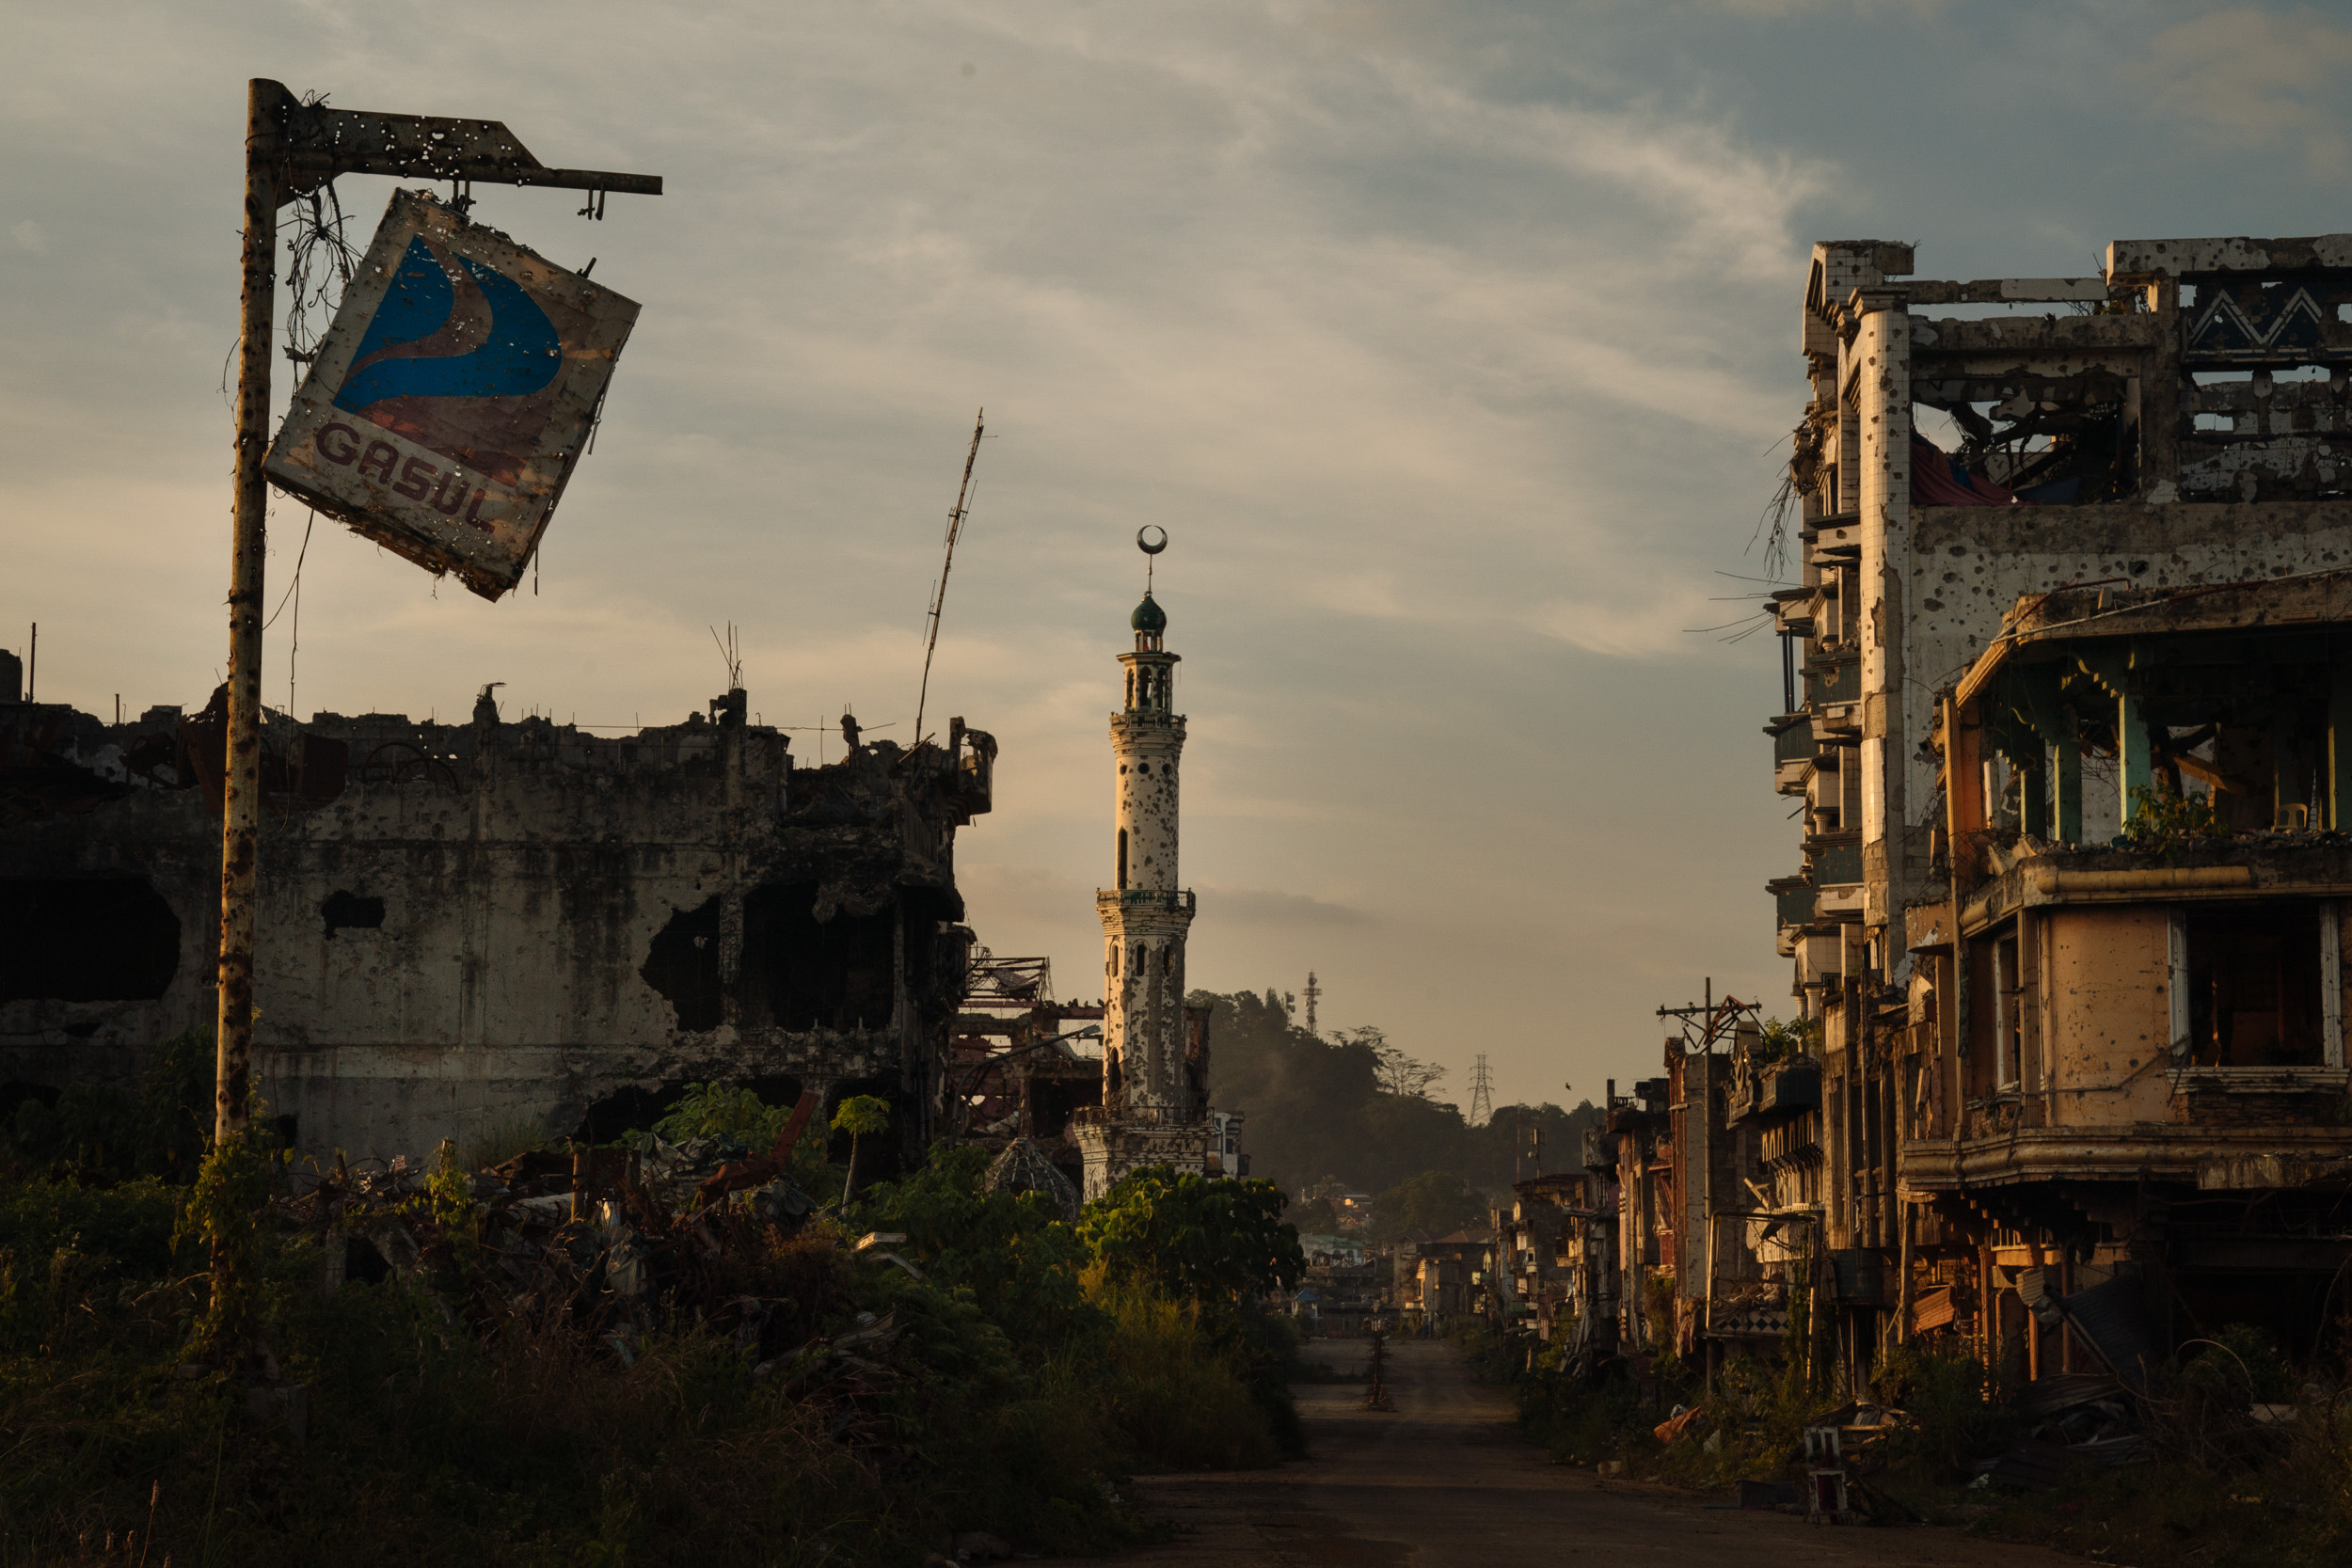  The ruins of Marawi City are seen at sunset. It has been more than a year since the Philippine military declared the Muslim-majority city of Marawi “liberated” from ISIS-linked militants, but the city remains a ghost town, and locals are becoming mo